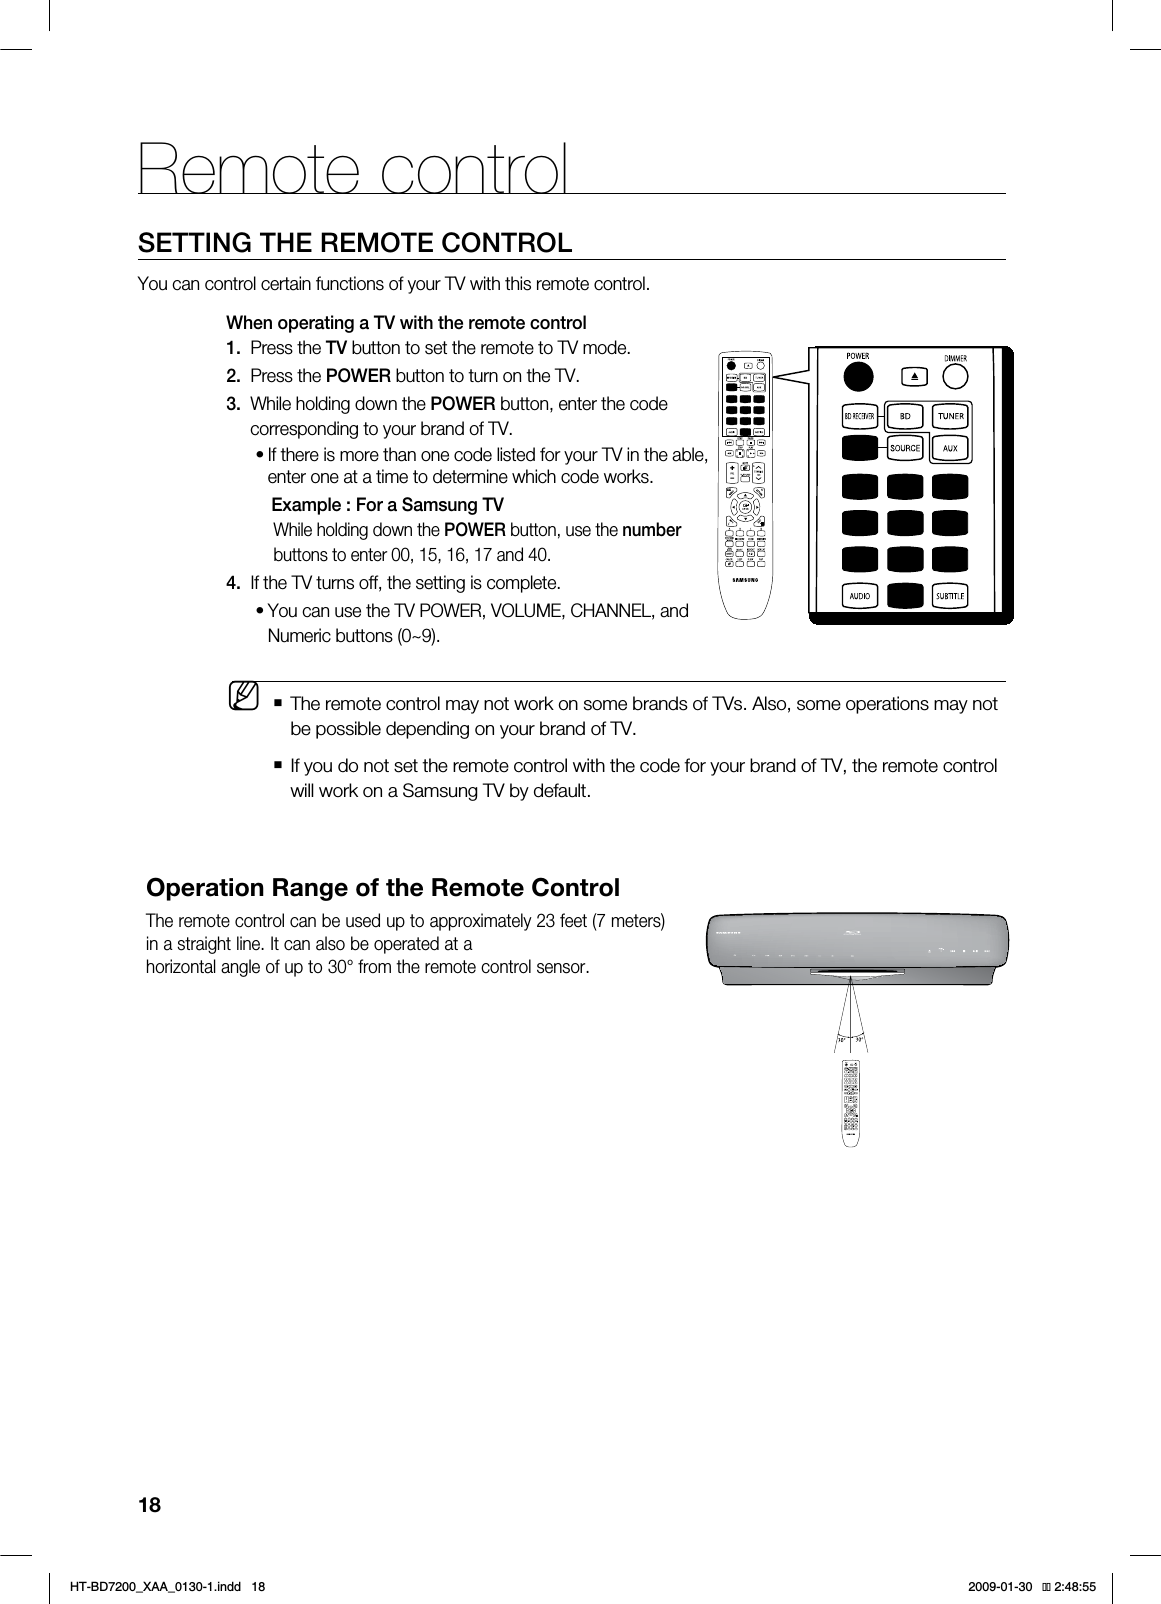 18Remote controlSETTING THE REMOTE CONTROLYou can control certain functions of your TV with this remote control.When operating a TV with the remote control1.   Press the TV button to set the remote to TV mode. 2.   Press the POWER button to turn on the TV.3.  While holding down the POWER button, enter the code          corresponding to your brand of TV.If there is more than one code listed for your TV in the able, enter one at a time to determine which code works.  Example : For a Samsung TVWhile holding down the POWER button, use the numberbuttons to enter 00, 15, 16, 17 and 40.4.   If the TV turns off, the setting is complete.   You can use the TV POWER, VOLUME, CHANNEL, and Numeric buttons (0~9).  The remote control may not work on some brands of TVs. Also, some operations may not be possible depending on your brand of TV.   If you do not set the remote control with the code for your brand of TV, the remote control will work on a Samsung TV by default.••MOperation Range of the Remote ControlThe remote control can be used up to approximately 23 feet (7 meters) in a straight line. It can also be operated at ahorizontal angle of up to 30° from the remote control sensor.*6$&amp;A:##AKPFF 